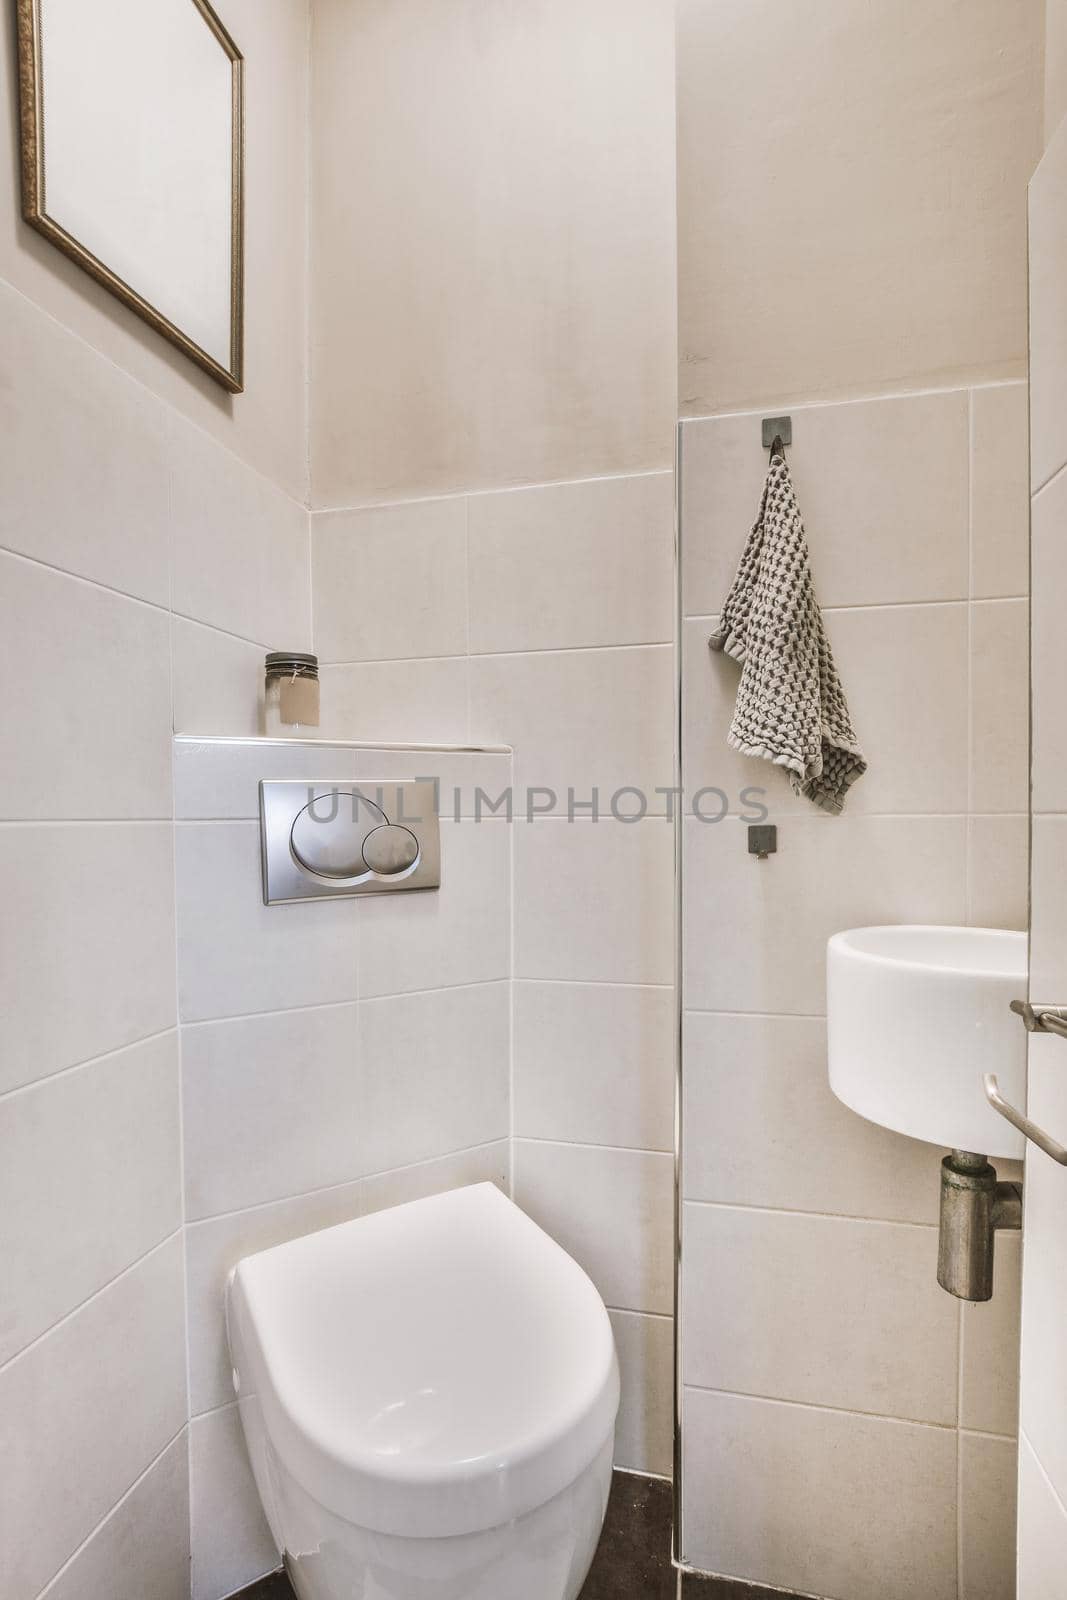 Interior of narrow restroom with sink and wall hung toilet with towel and checkered walls